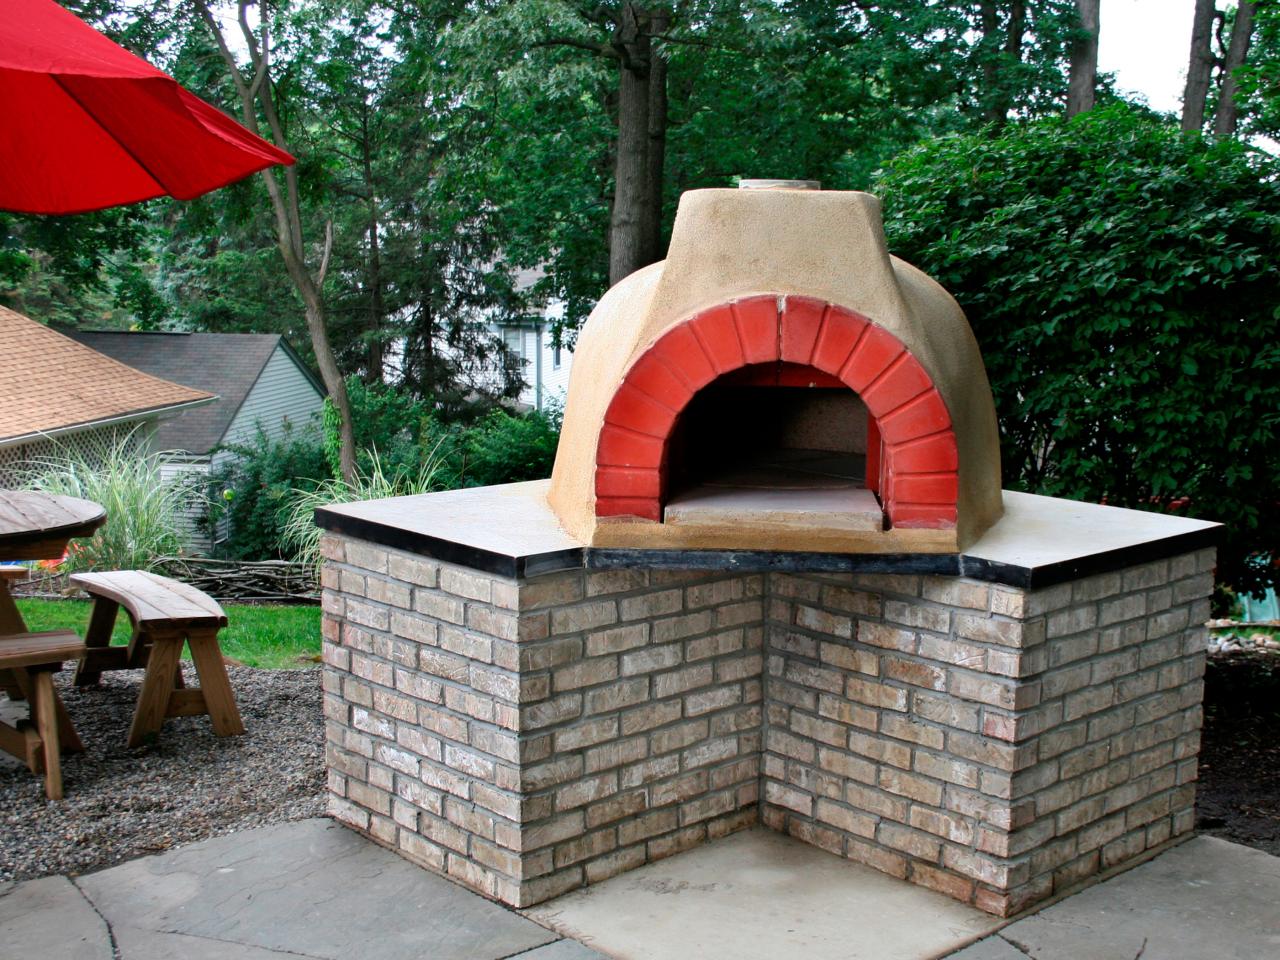 How To Build An Outdoor Pizza Oven, Diy Outdoor Pizza Oven Kit Canada